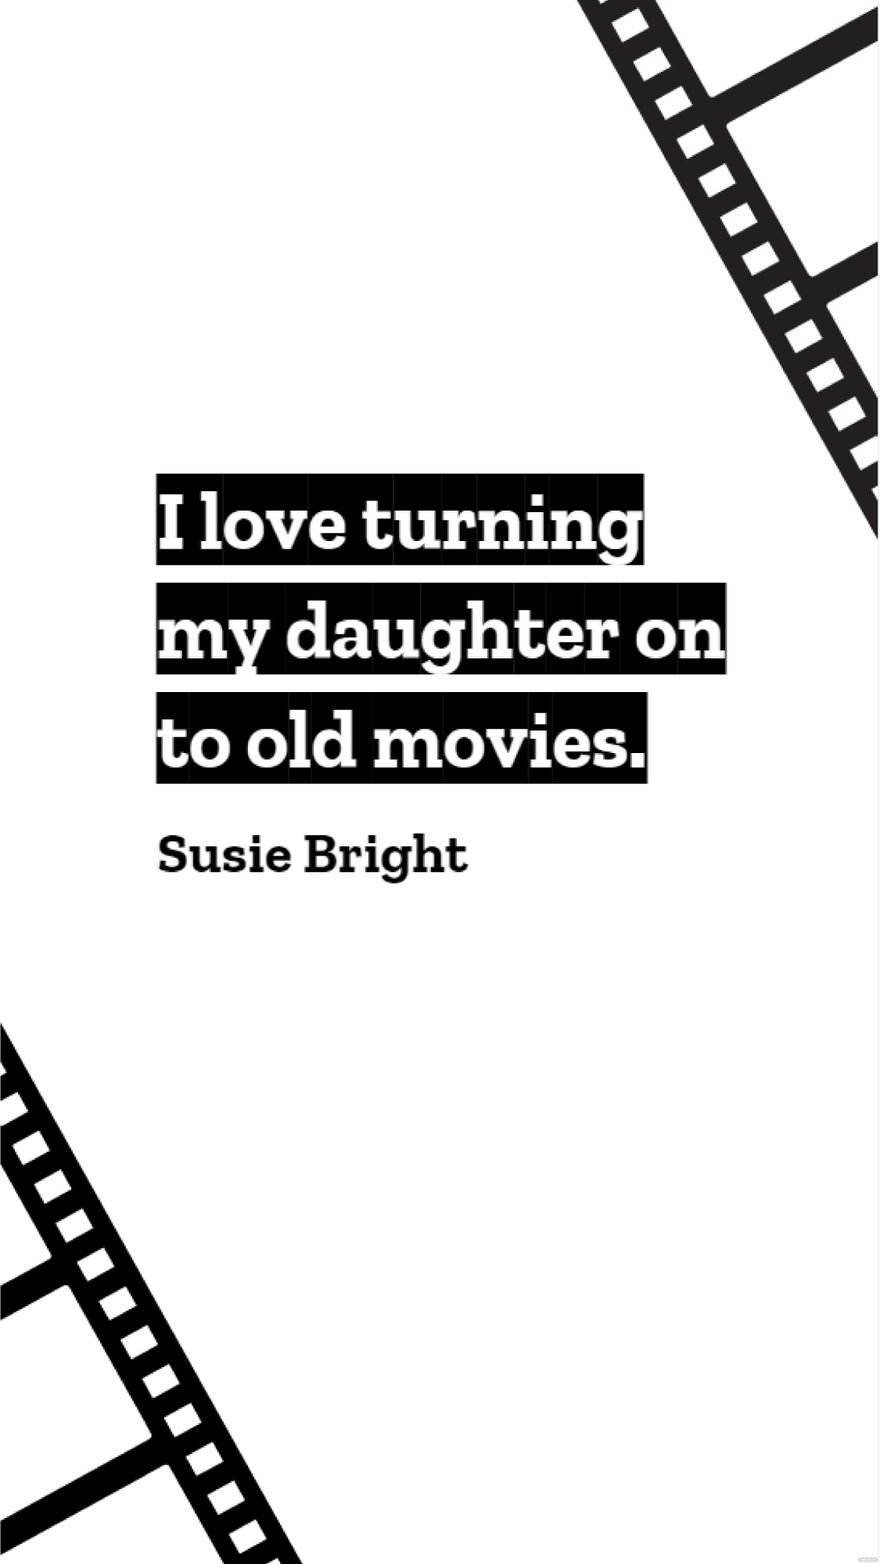 Susie Bright - I love turning my daughter on to old movies.